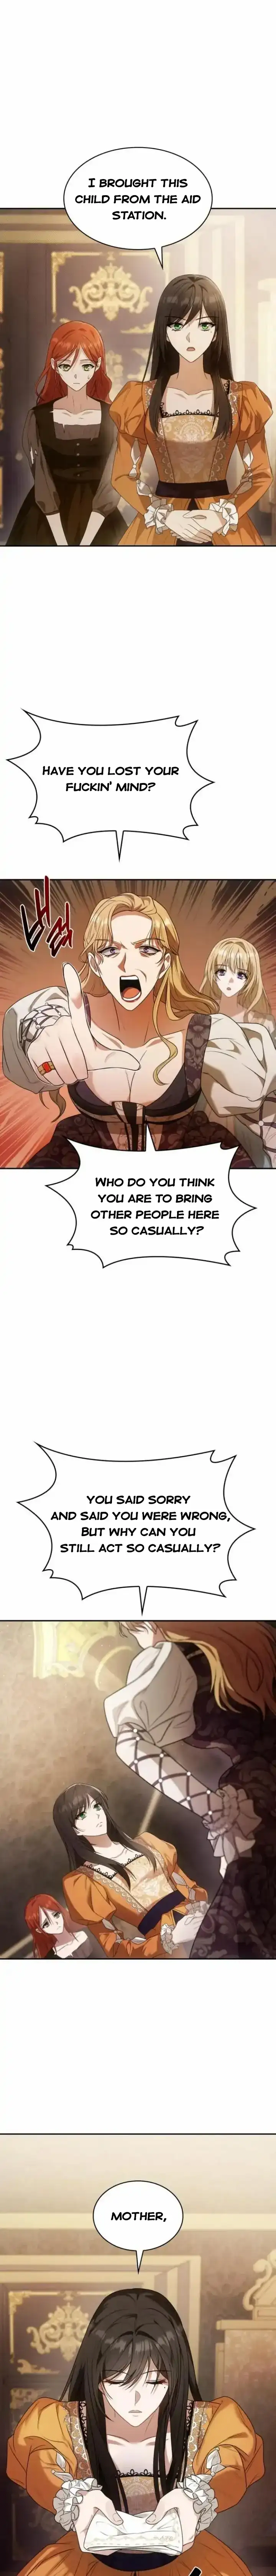 Sister, I Am the Queen in This Life chapter 6.5 - page 1